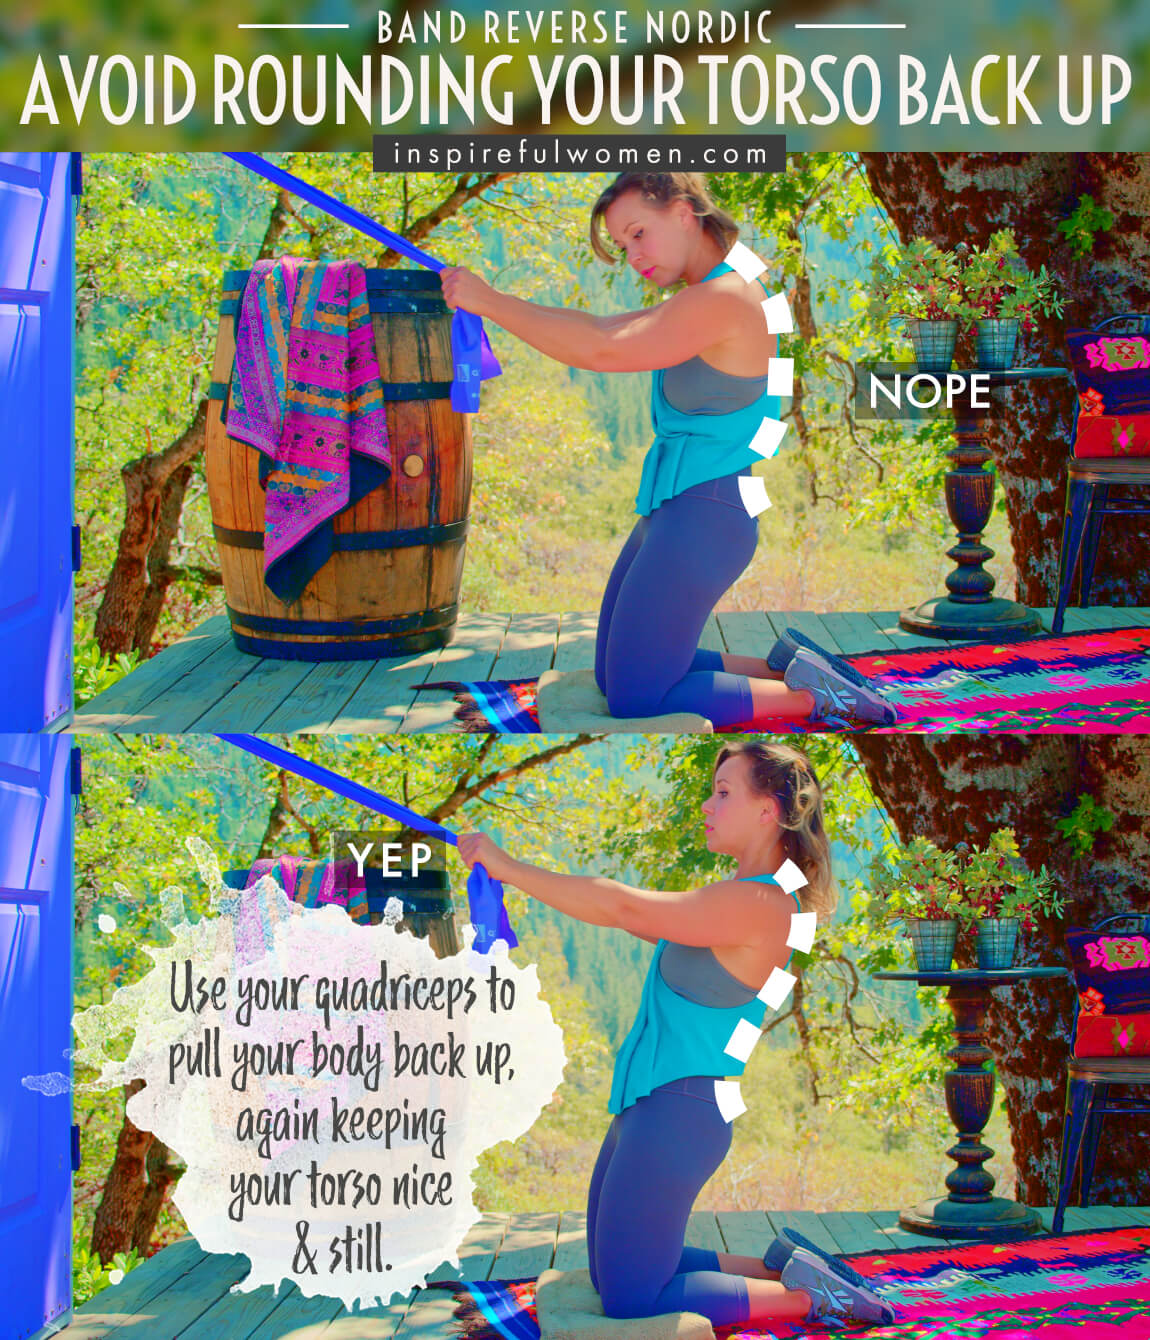 avoid-rounding-your-torso-back-up-banded-reverse-nordic-quadriceps-core-exercise-proper-form